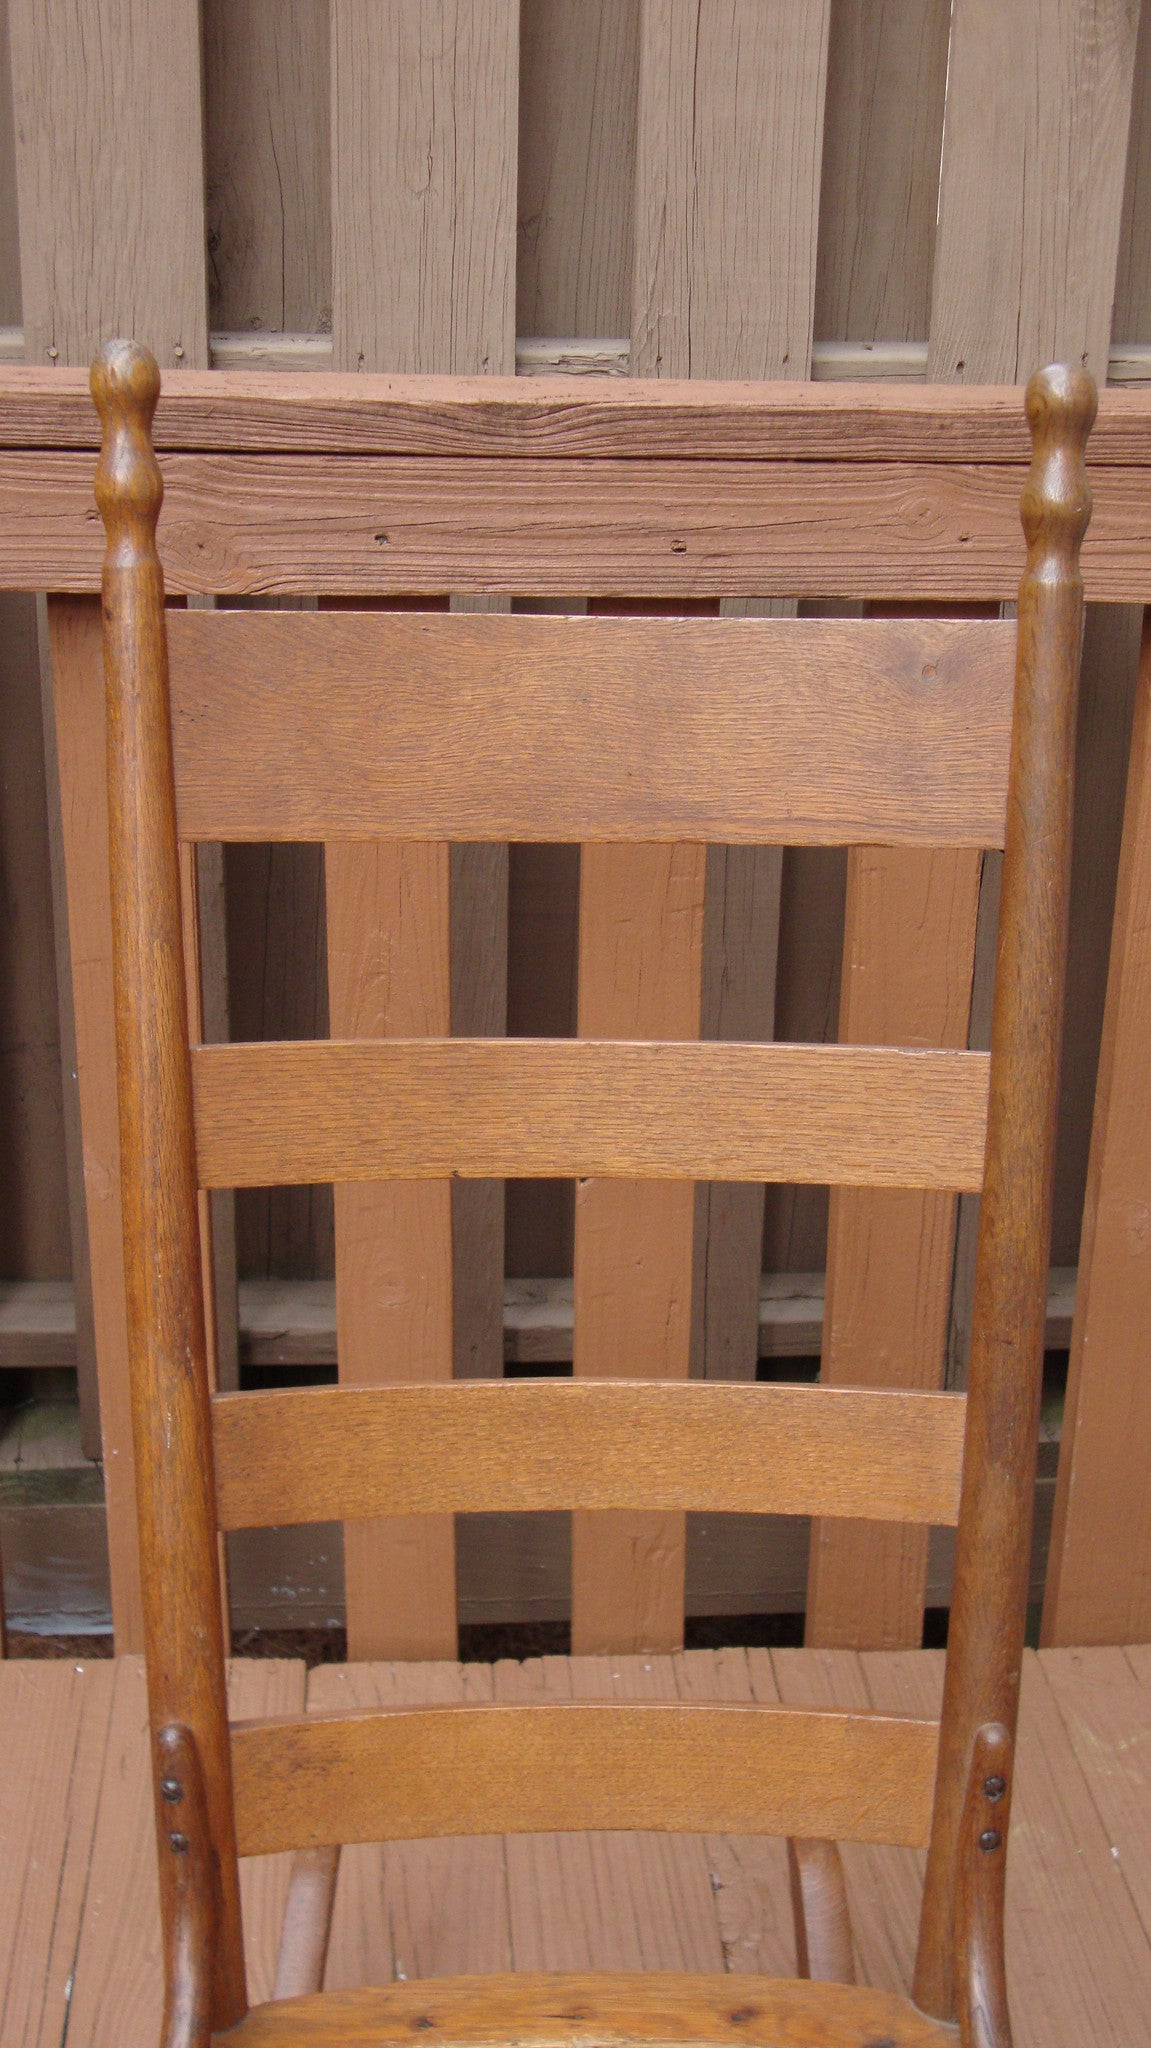 [SOLD] Antique Early American Ladderback Rocker Chair